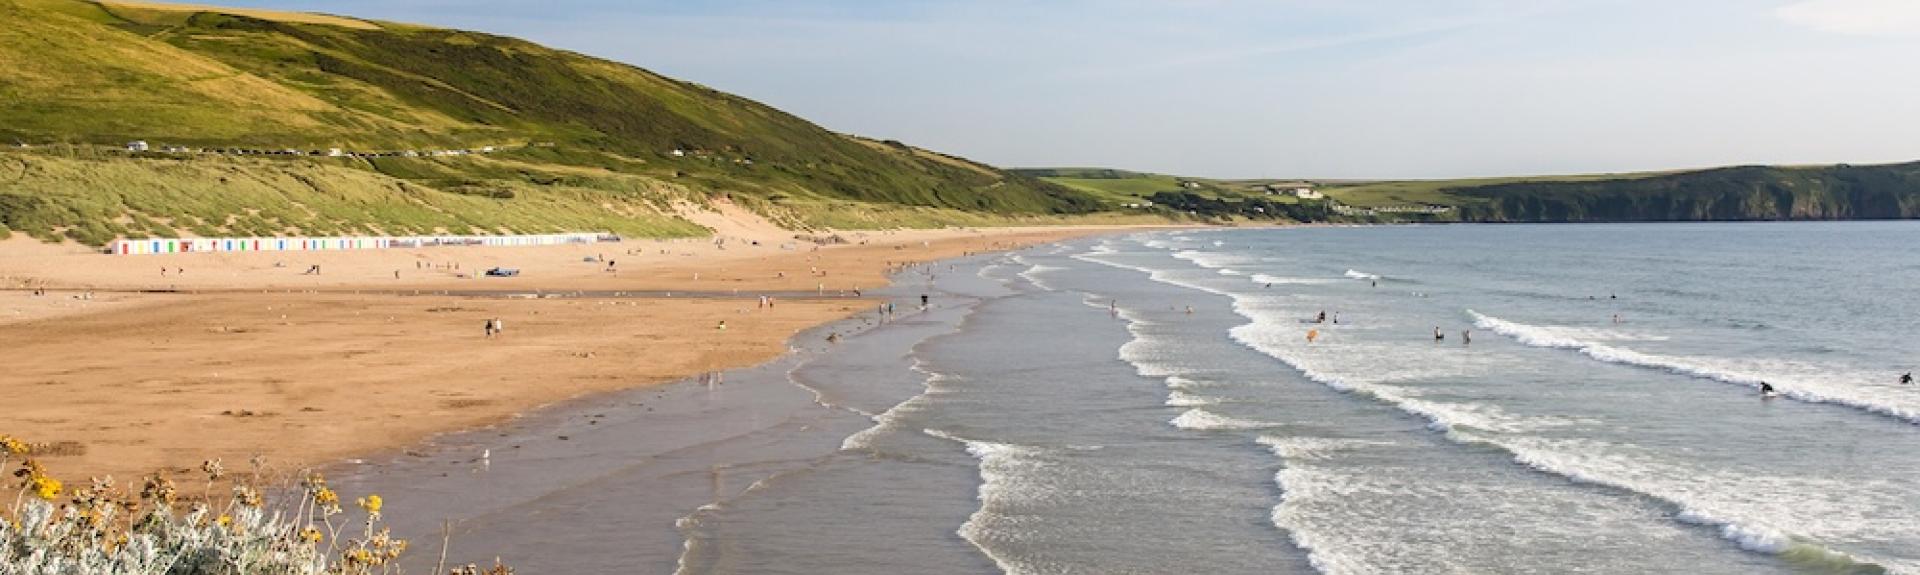 Find UK Coastal Cottages Within a 15-minute Drive of the Sea.